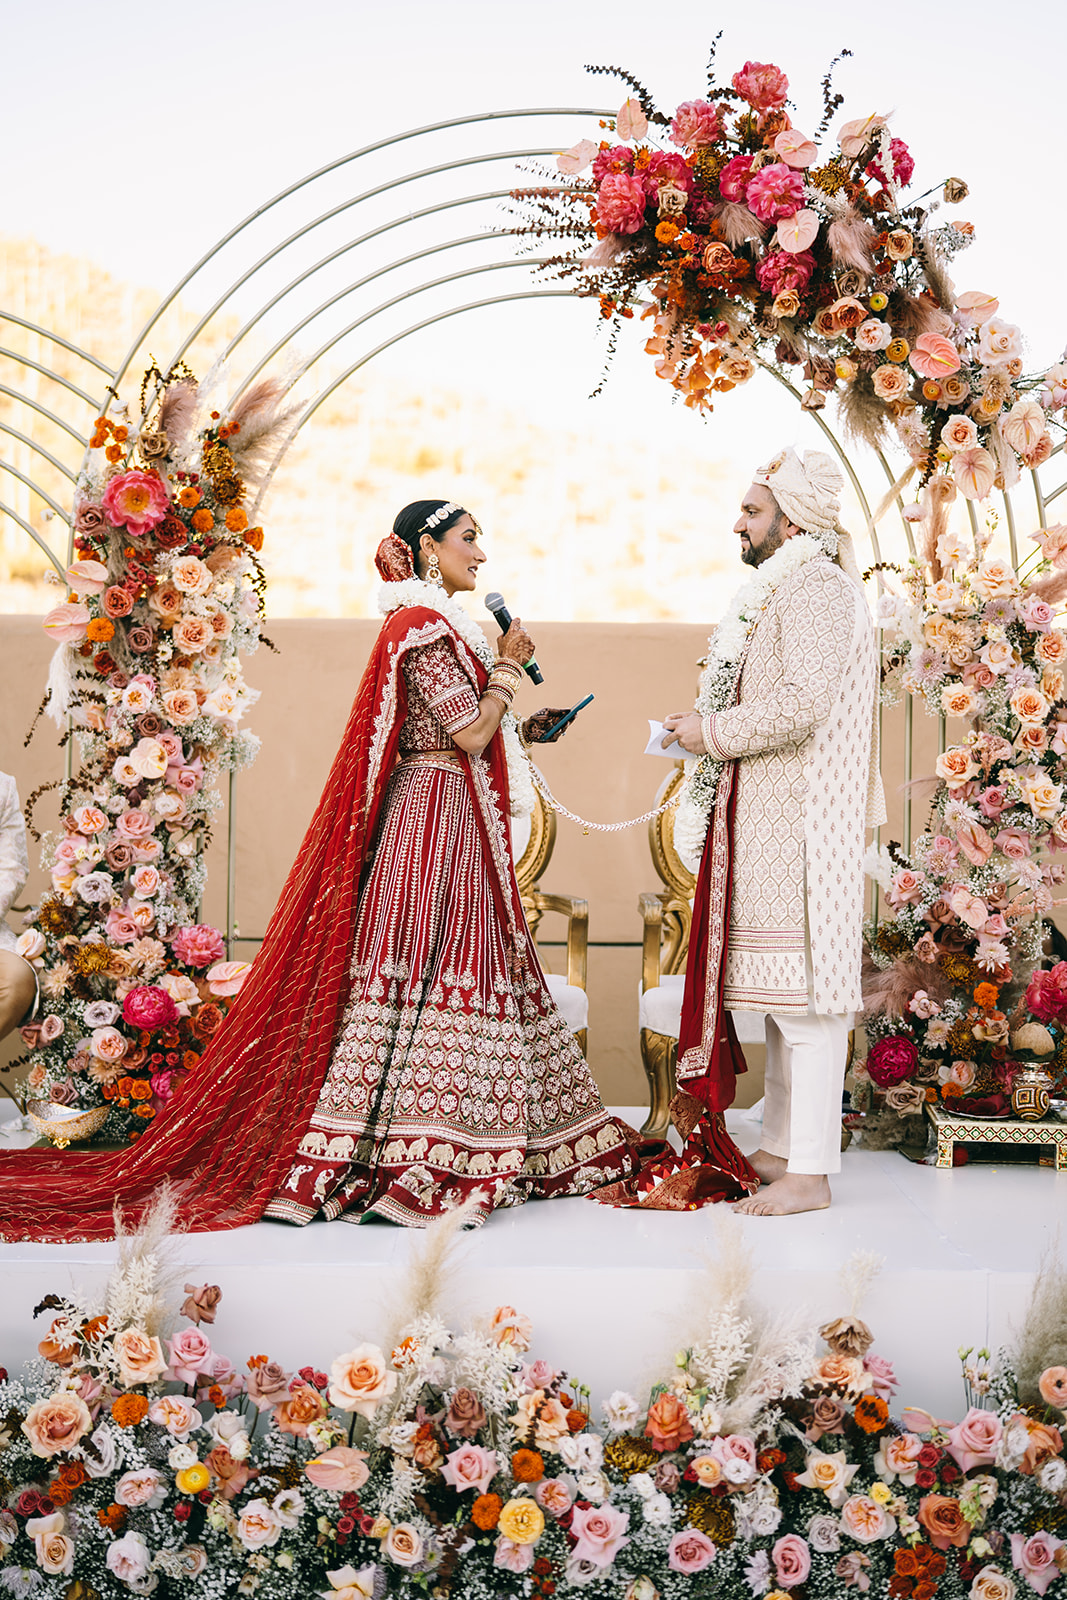 Indian bride holding mircophone and looking at her groom under flower arch